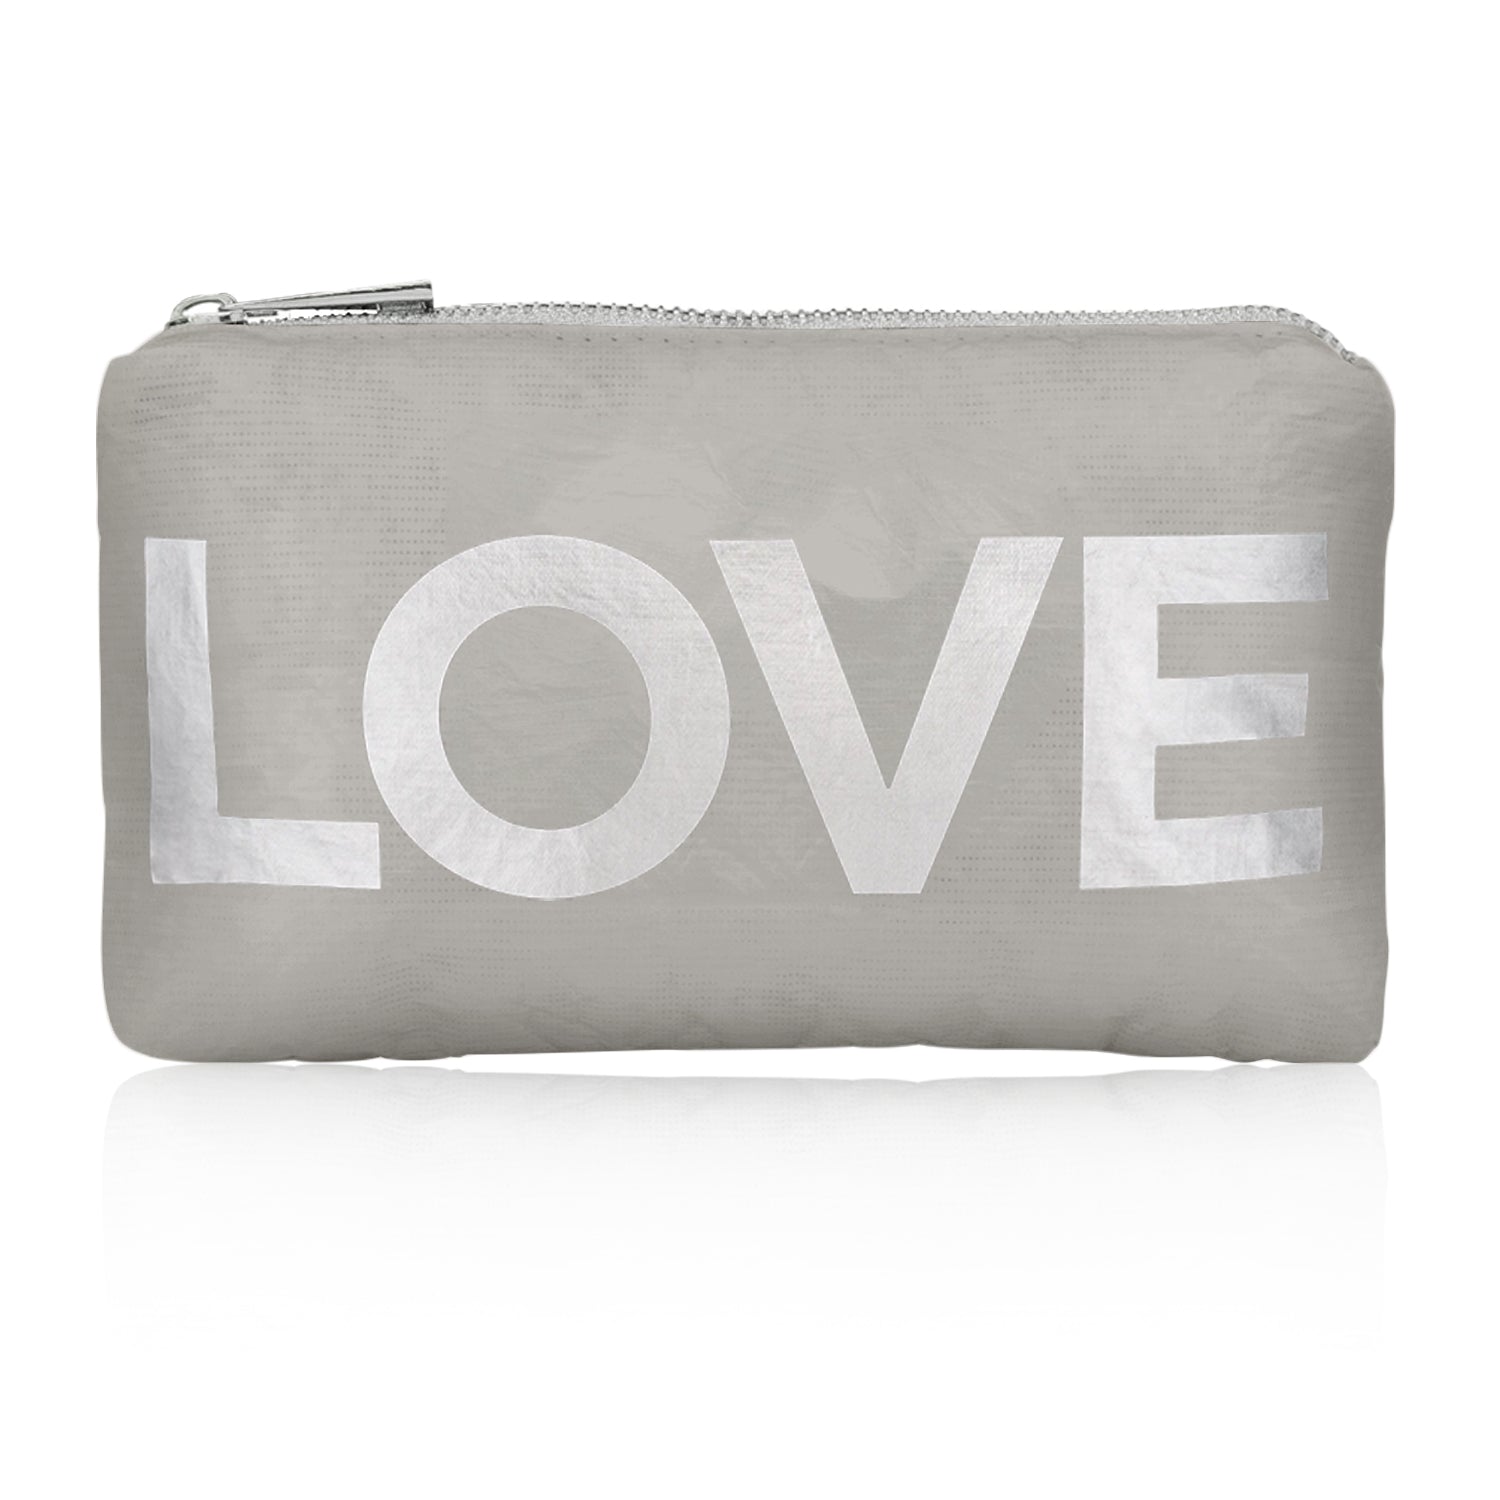 Mini Zipper Pack in Earth Gray with Silver "LOVE"